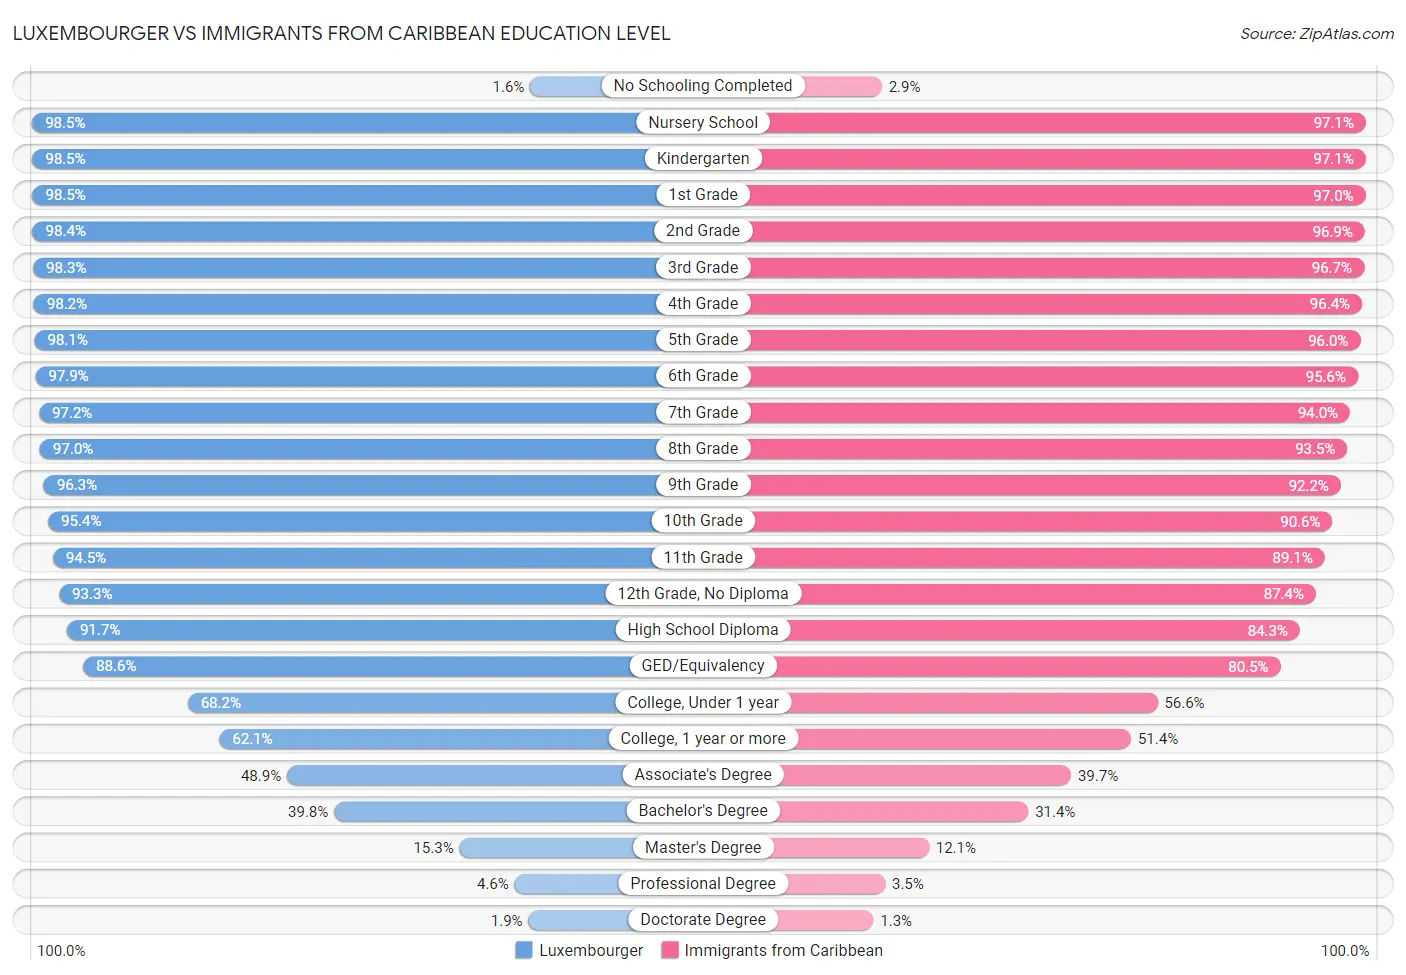 Luxembourger vs Immigrants from Caribbean Education Level